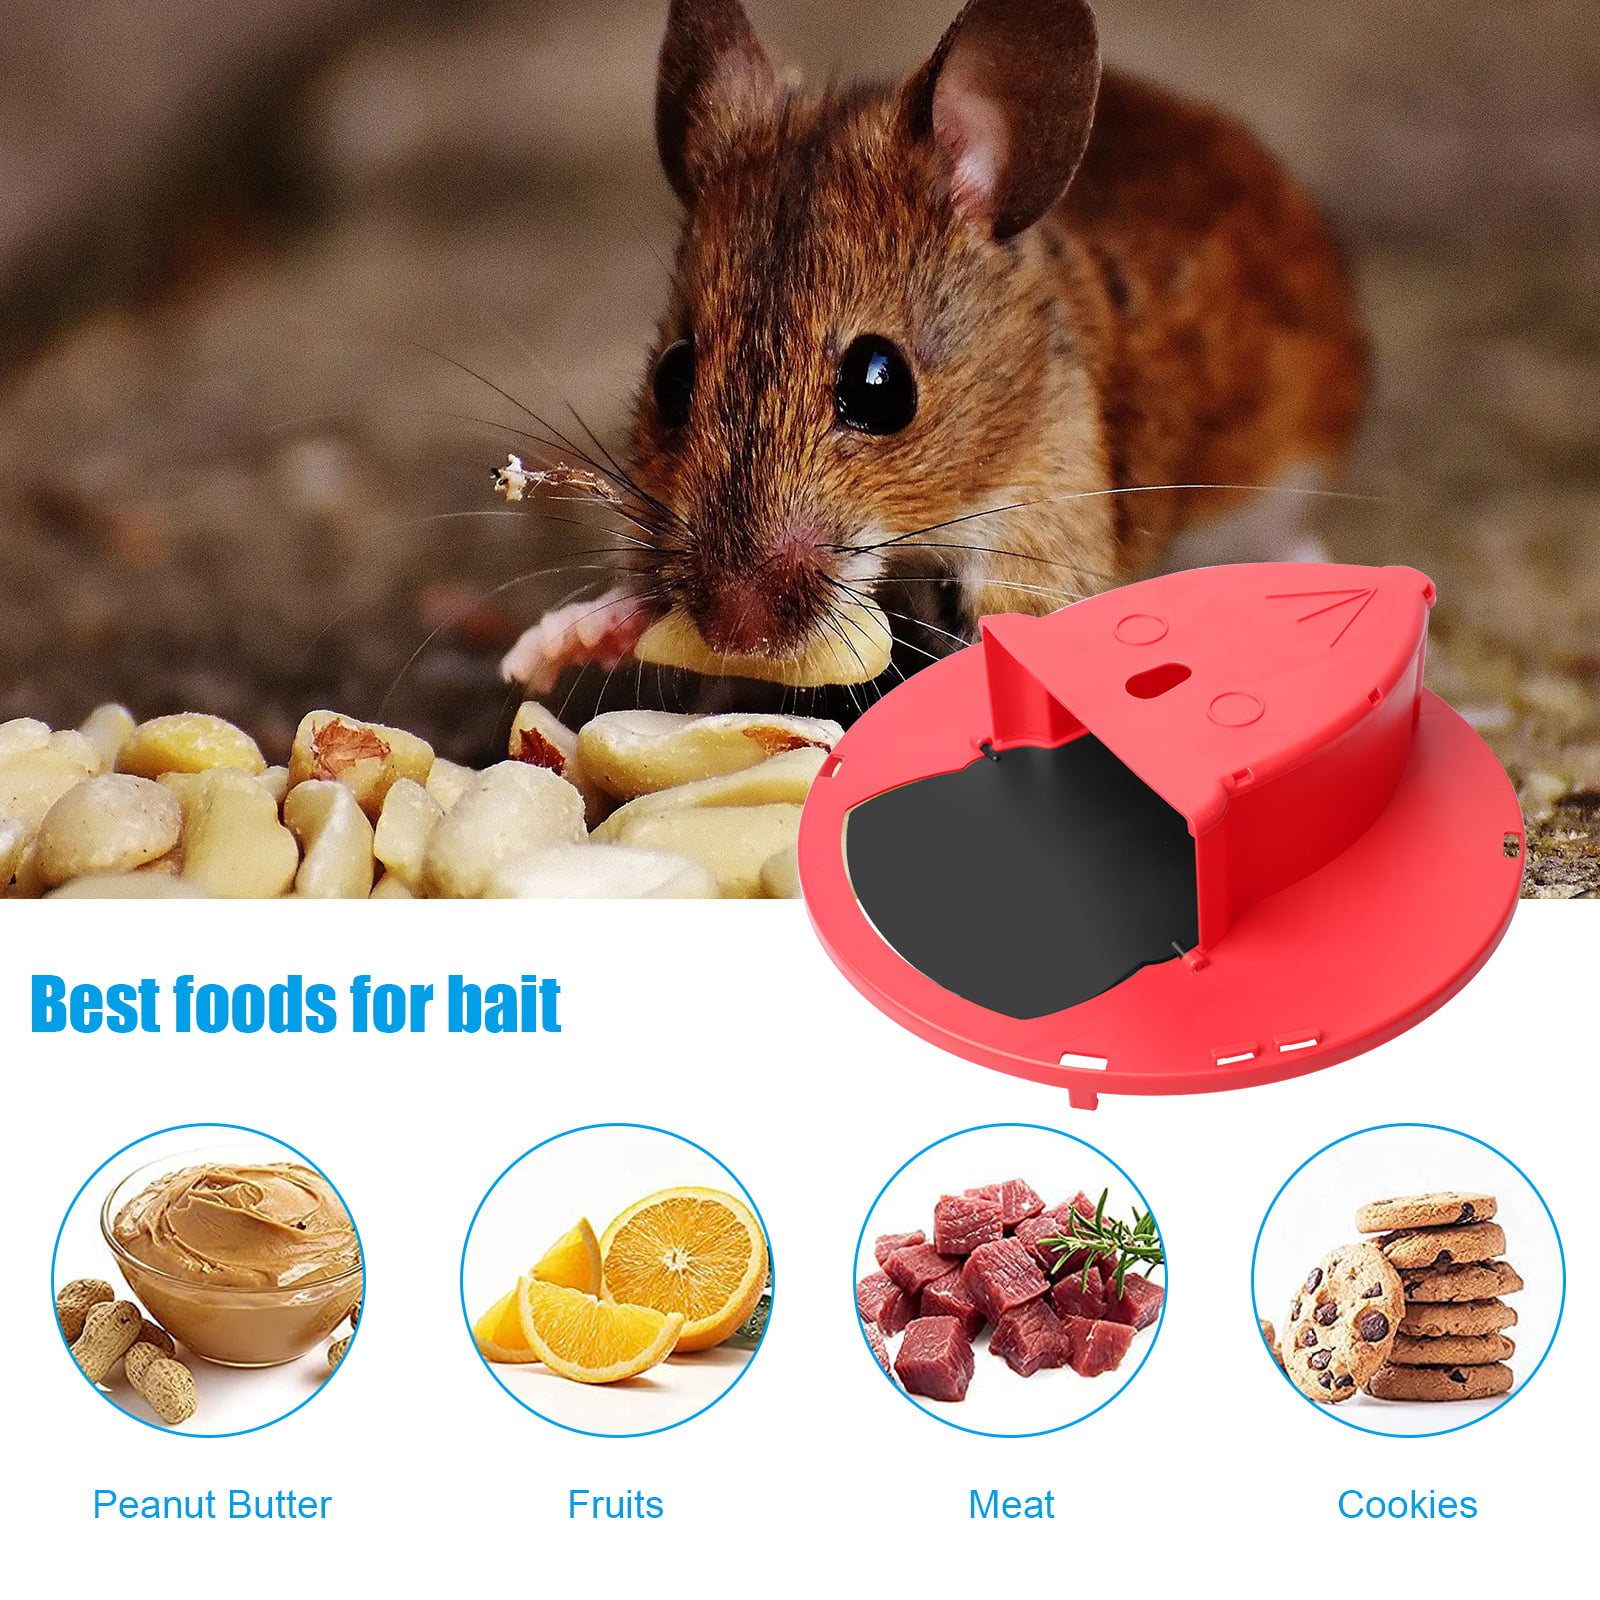 2 Piece Slide Bucket Lid Mouse/Rat Trap with Ramp, Auto Reset Multi Catch  for Indoor Outdoor, Compatible 5 Gallon Bucket, Mouse Trap Compatible,  Humane or Lethal Bucket Trap No See Kill 